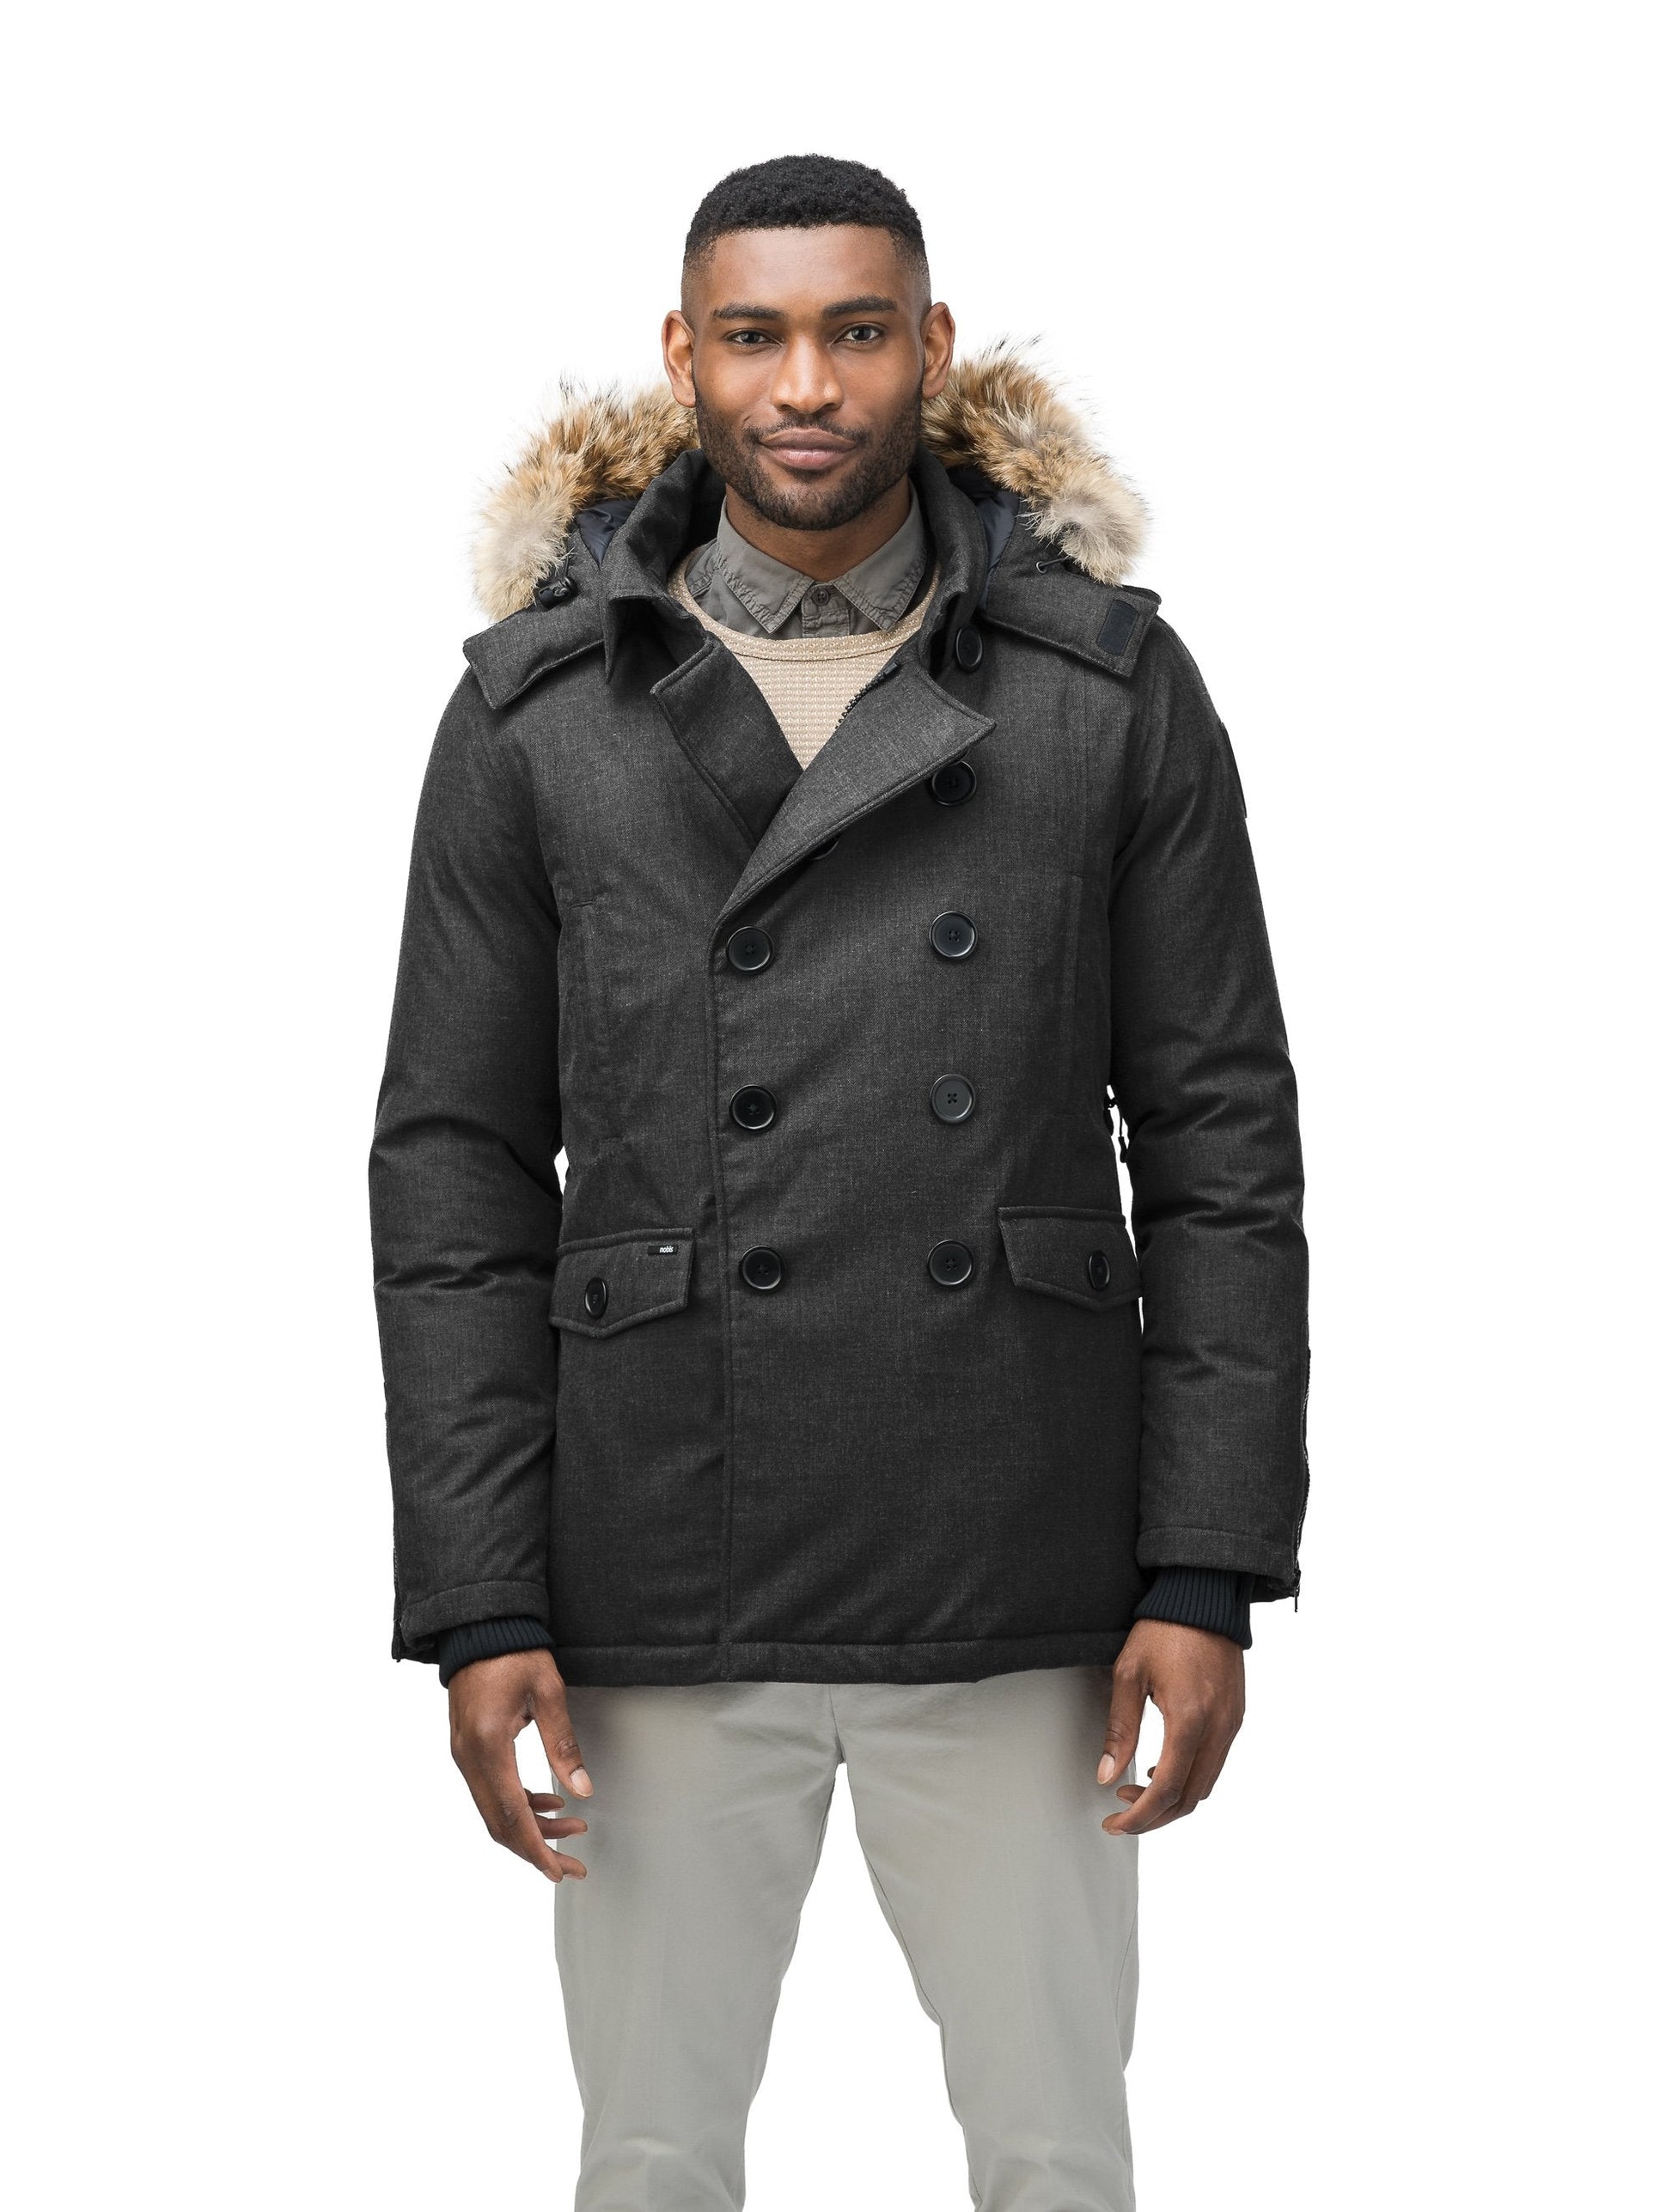 Men's double breasted down filled parka in H. Black